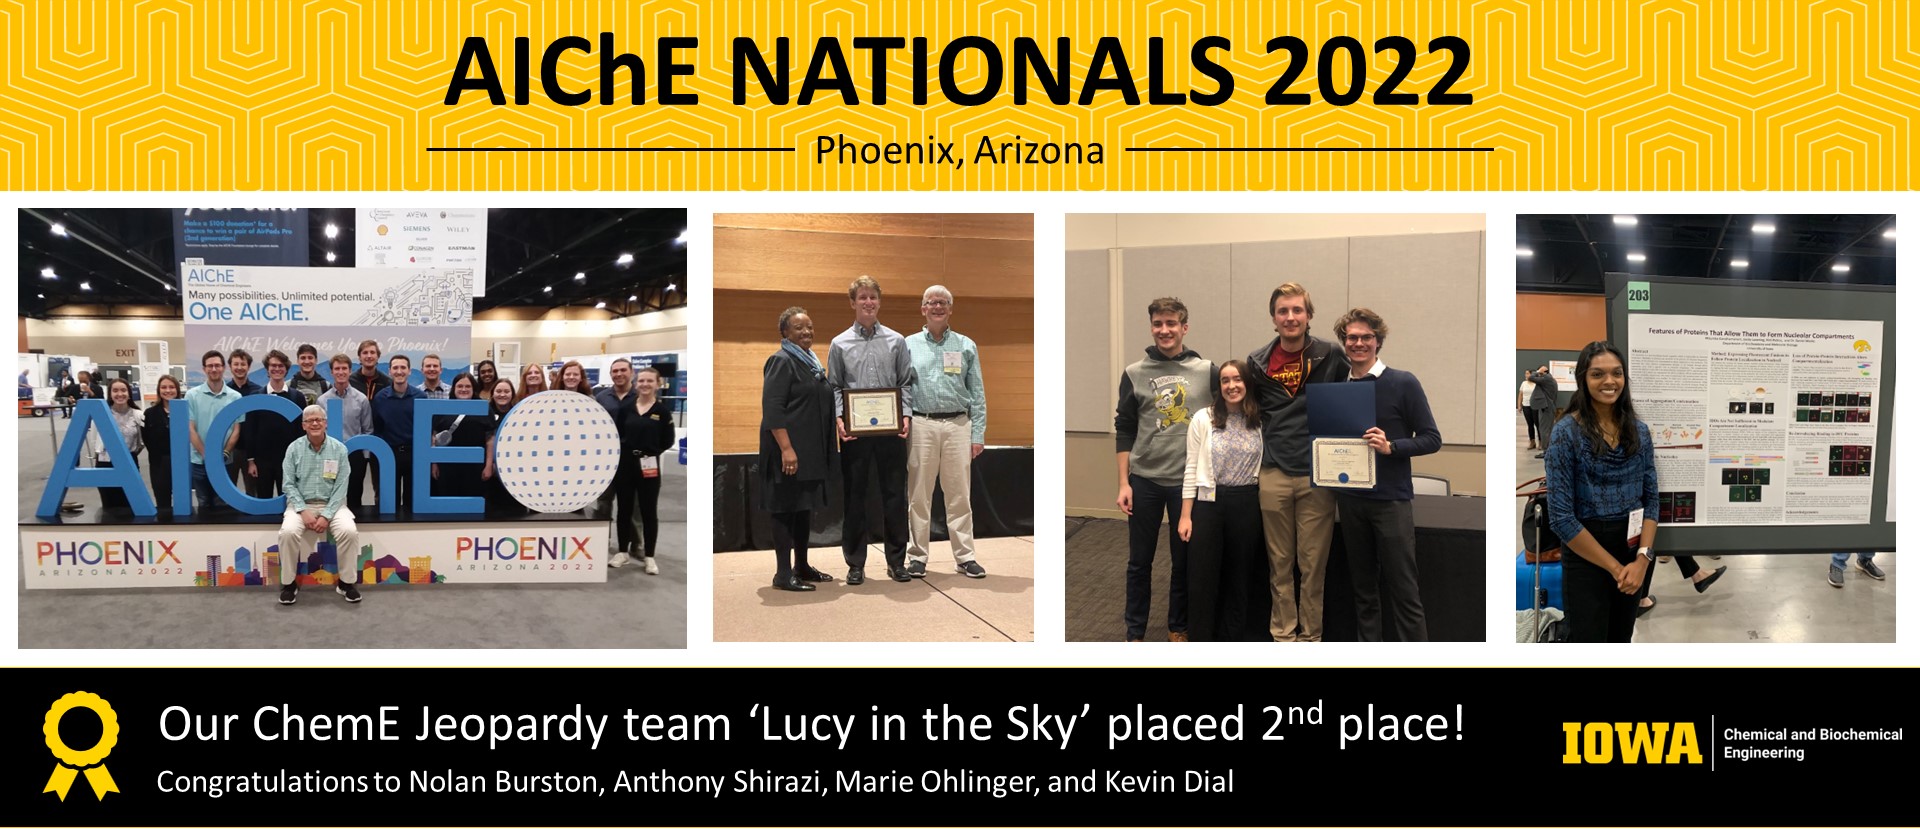 Photos from AIChE Nationals in Phoenix, Arizona